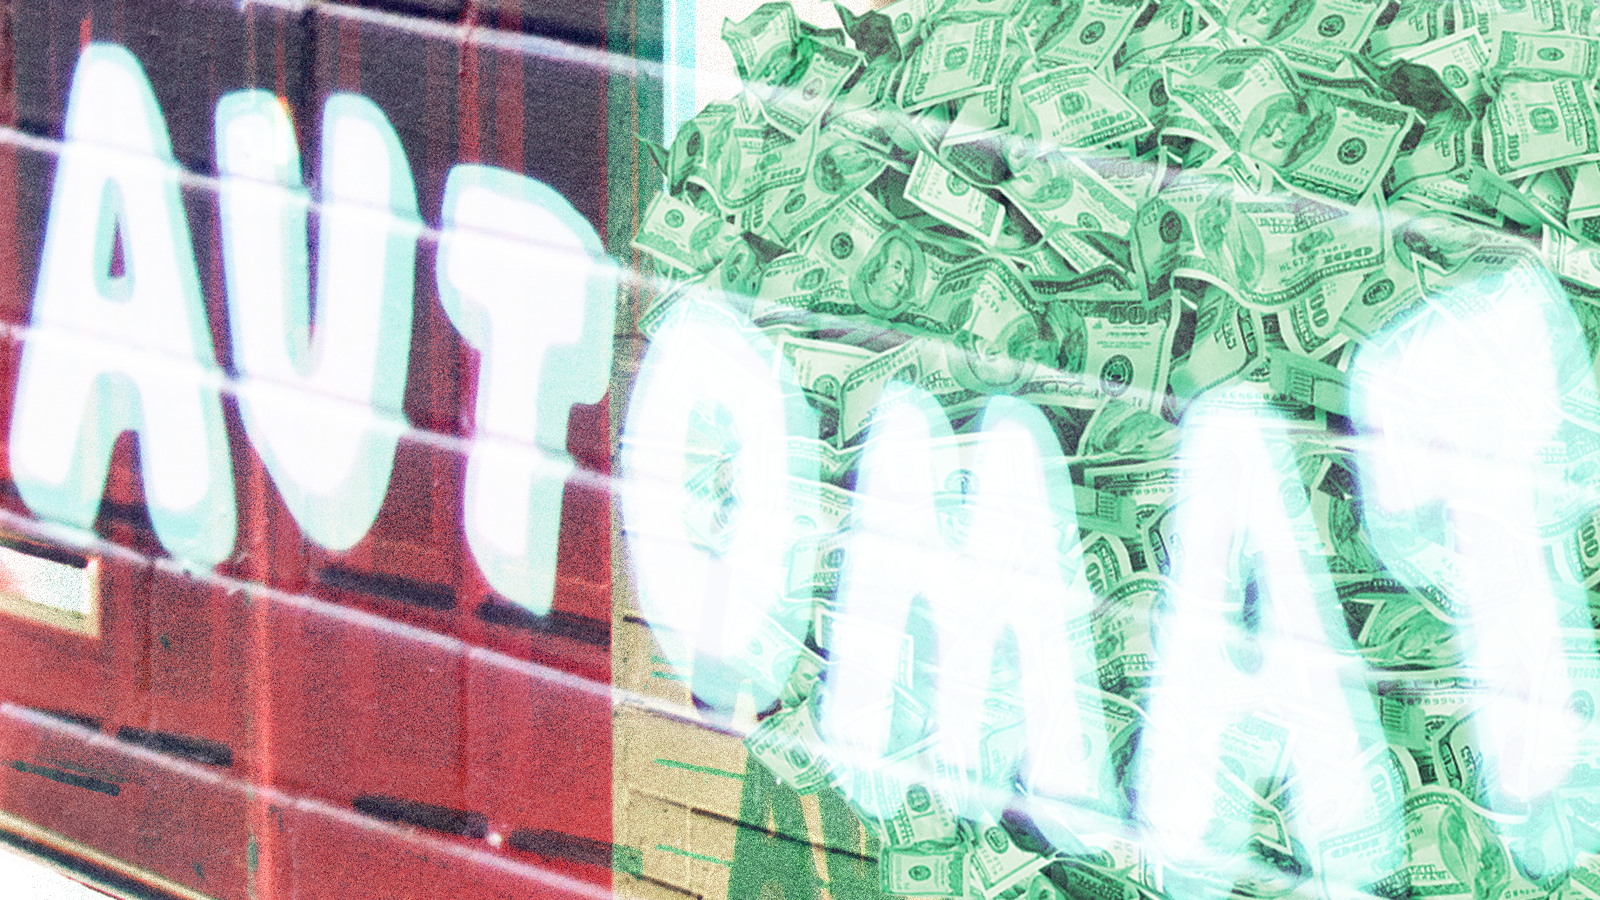 Overlaid images of money behind a sign that reads “Automat.”